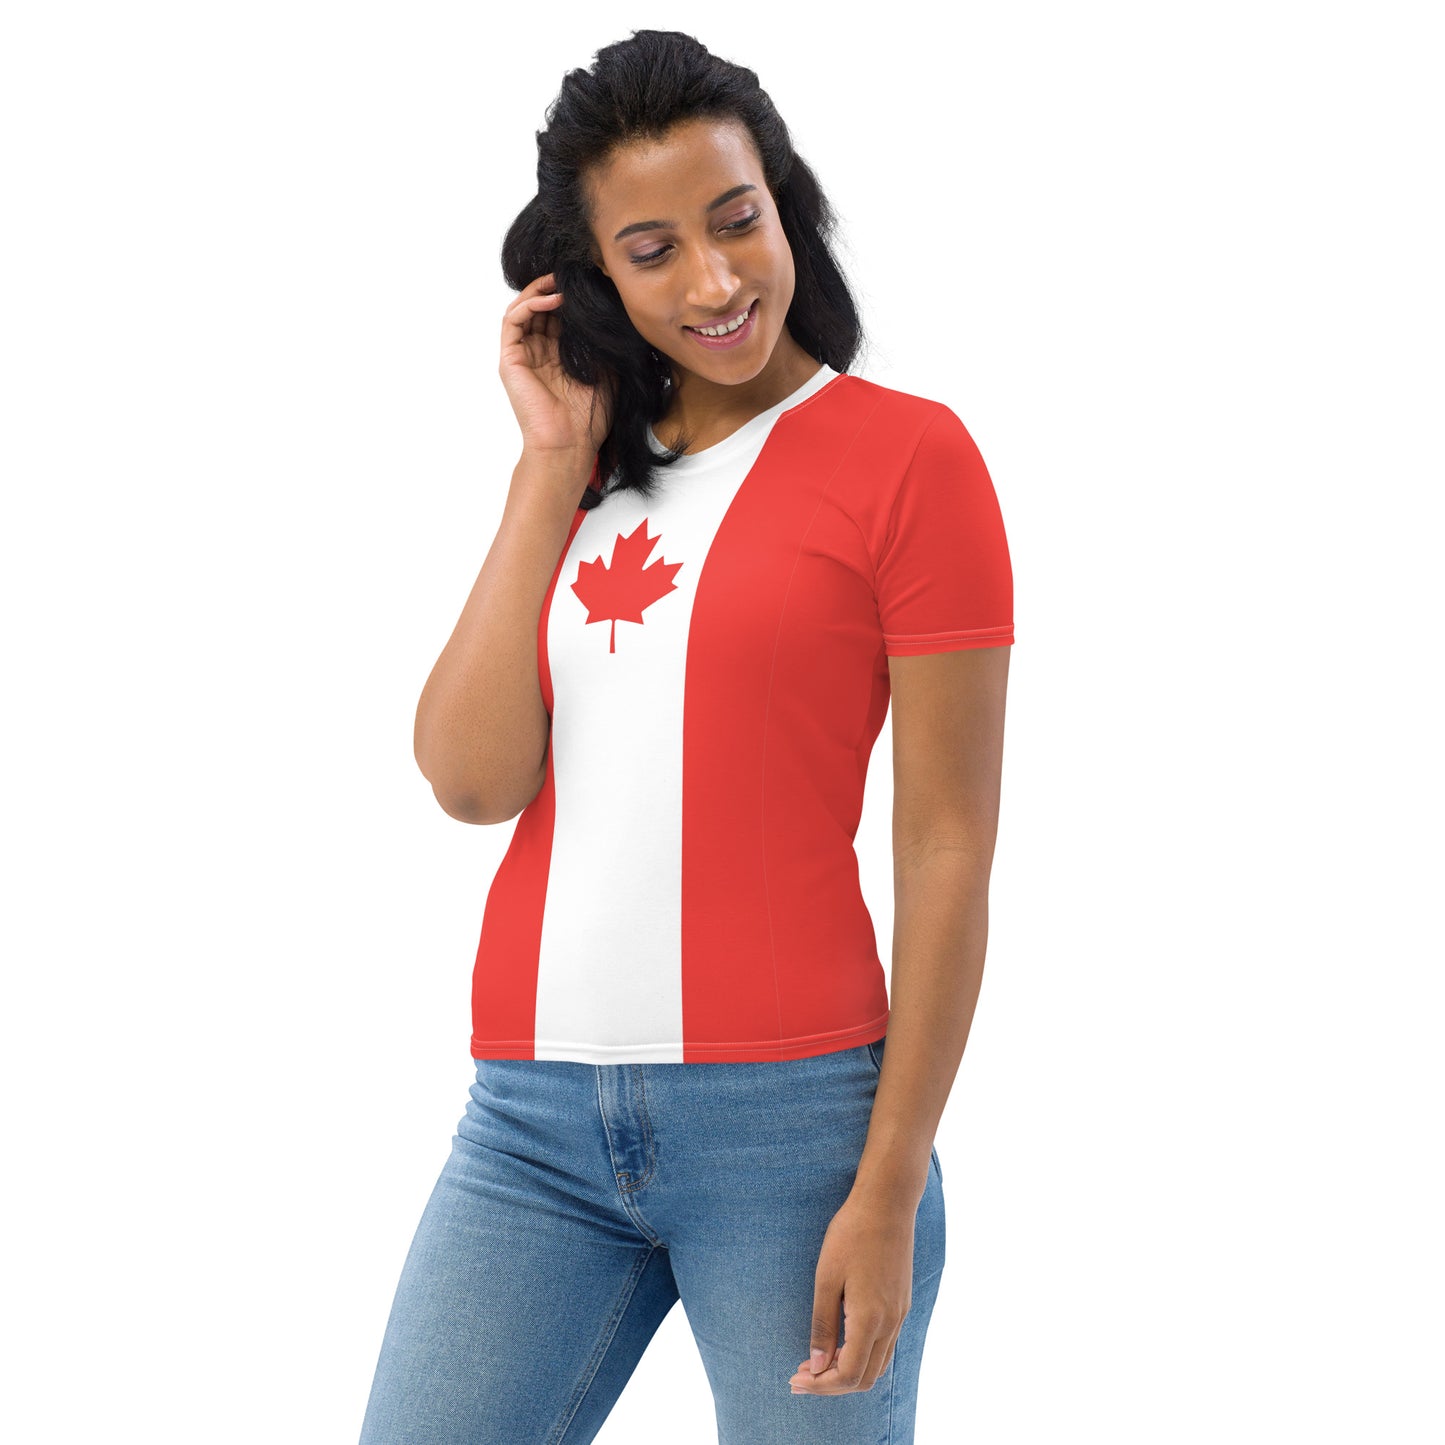 Comfortable Women's T-Shirt for Canada Day Festivities